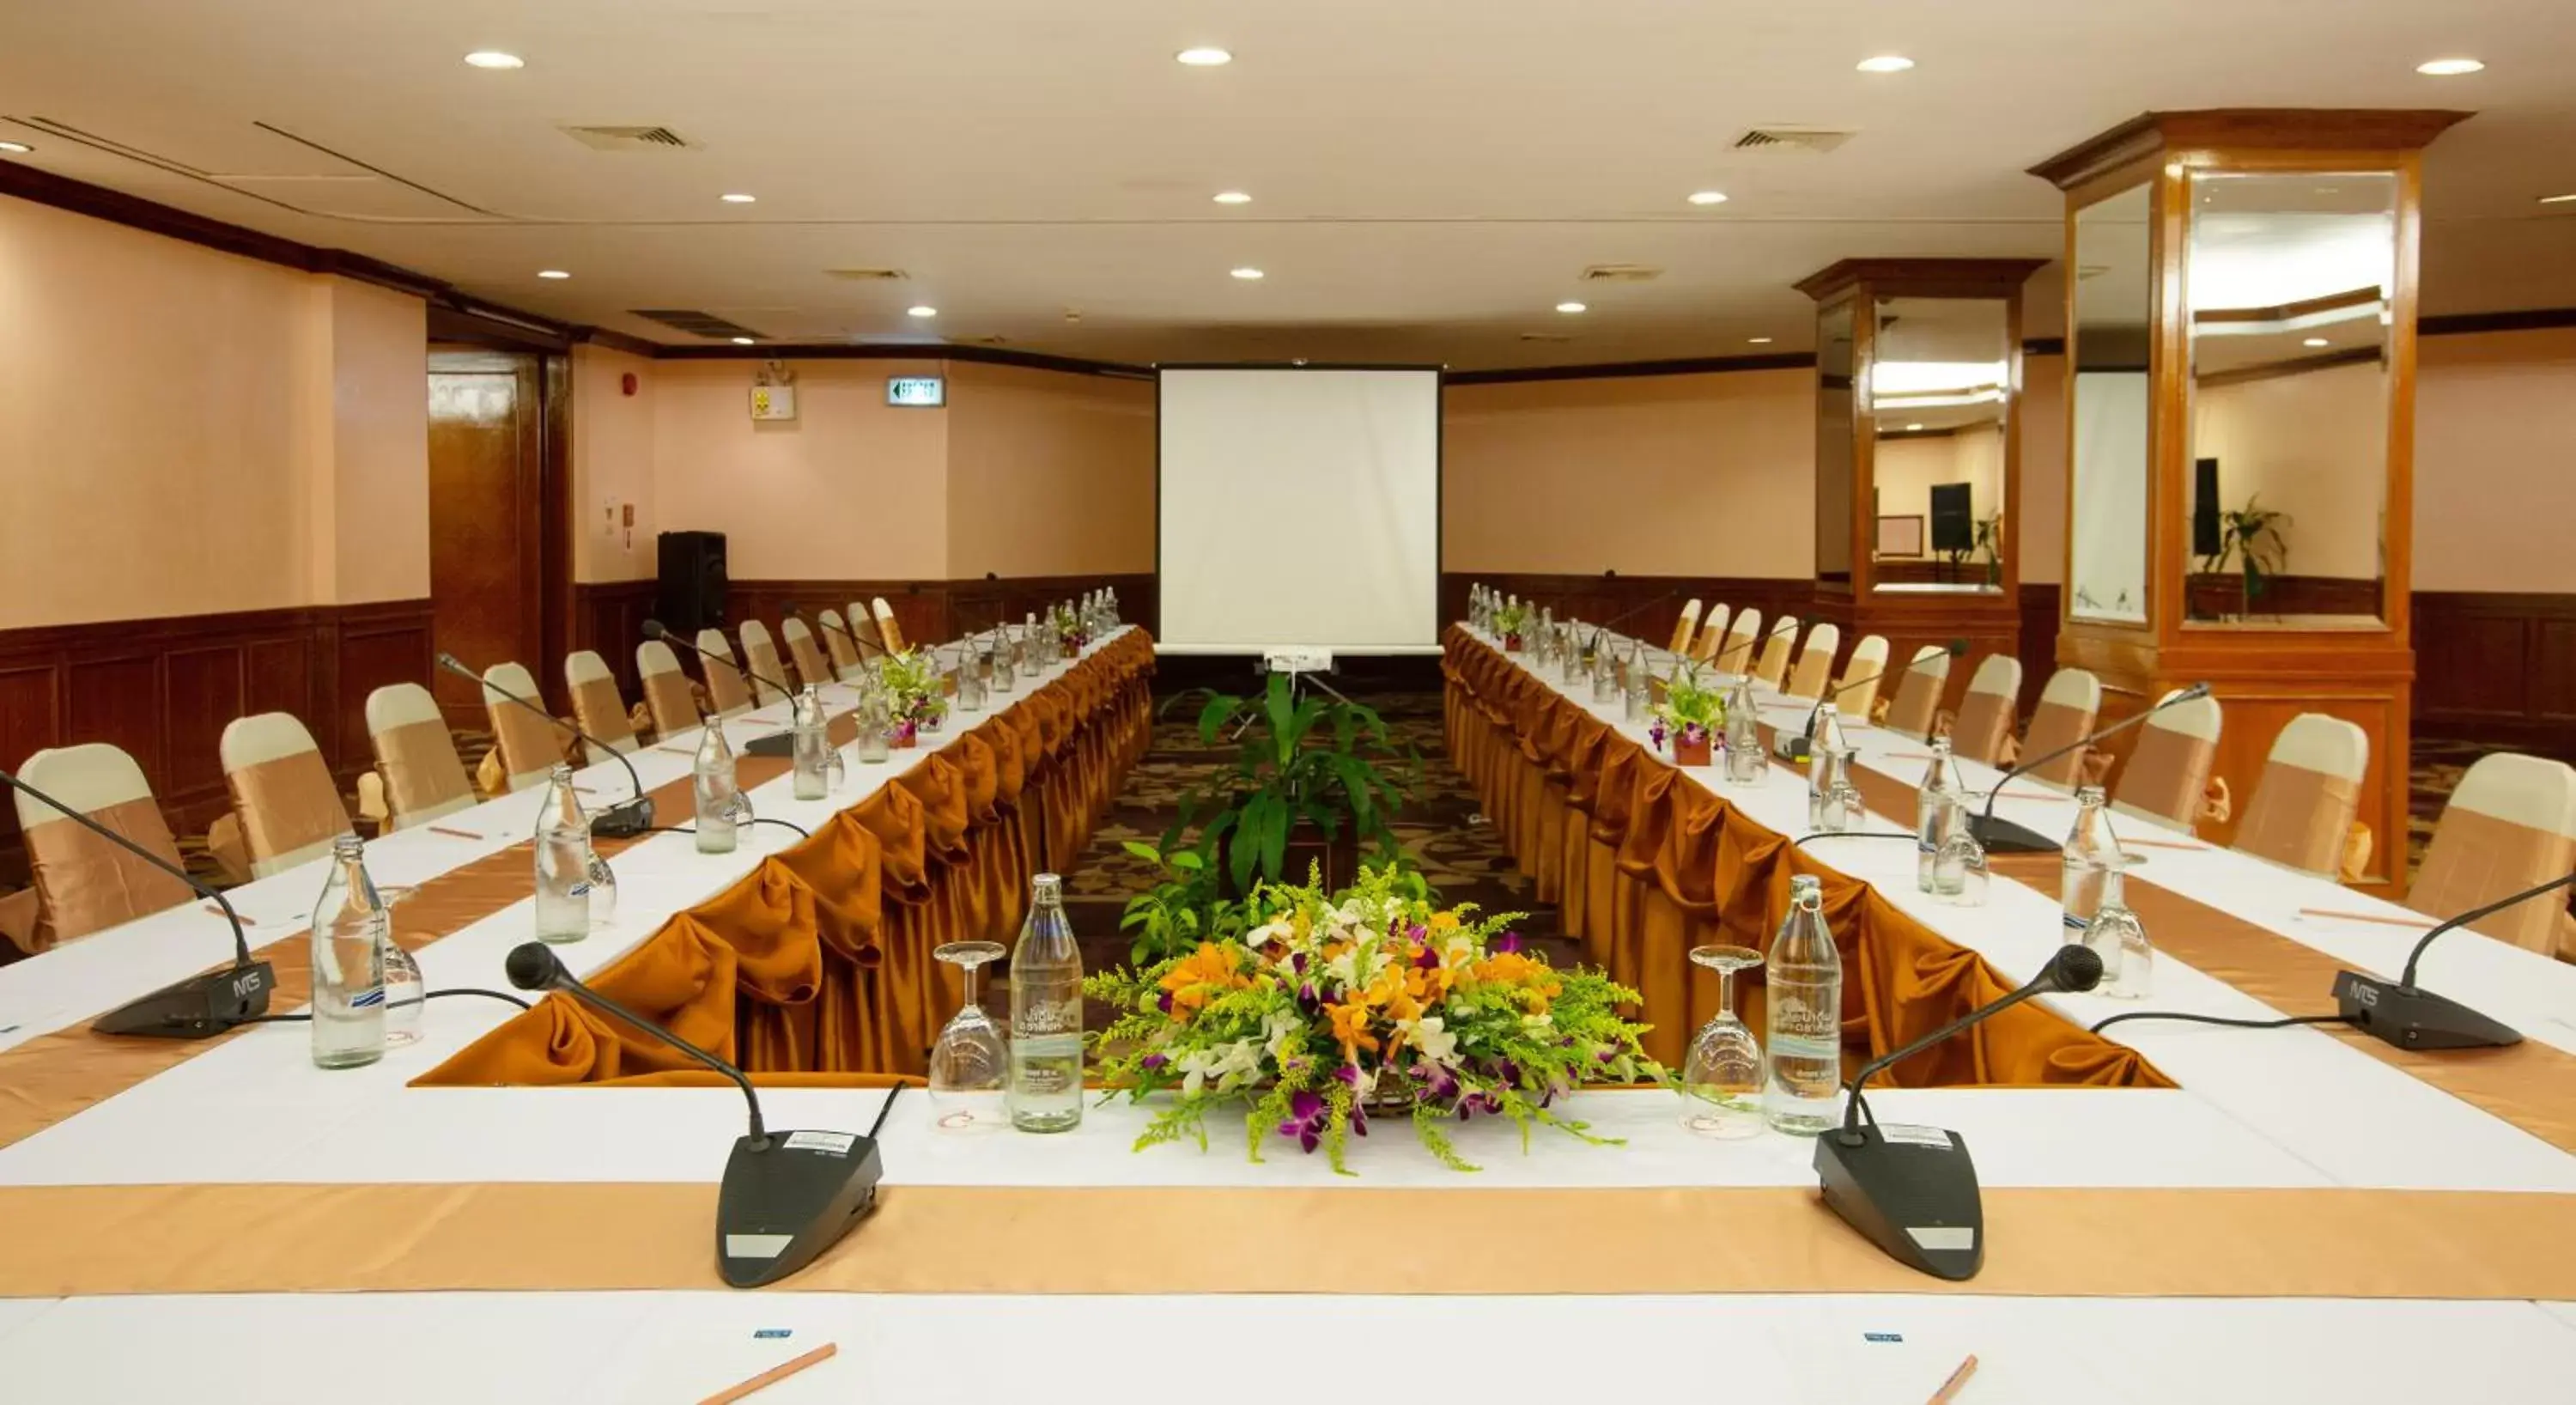 Meeting/conference room in Centra by Centara Hotel Mae Sot